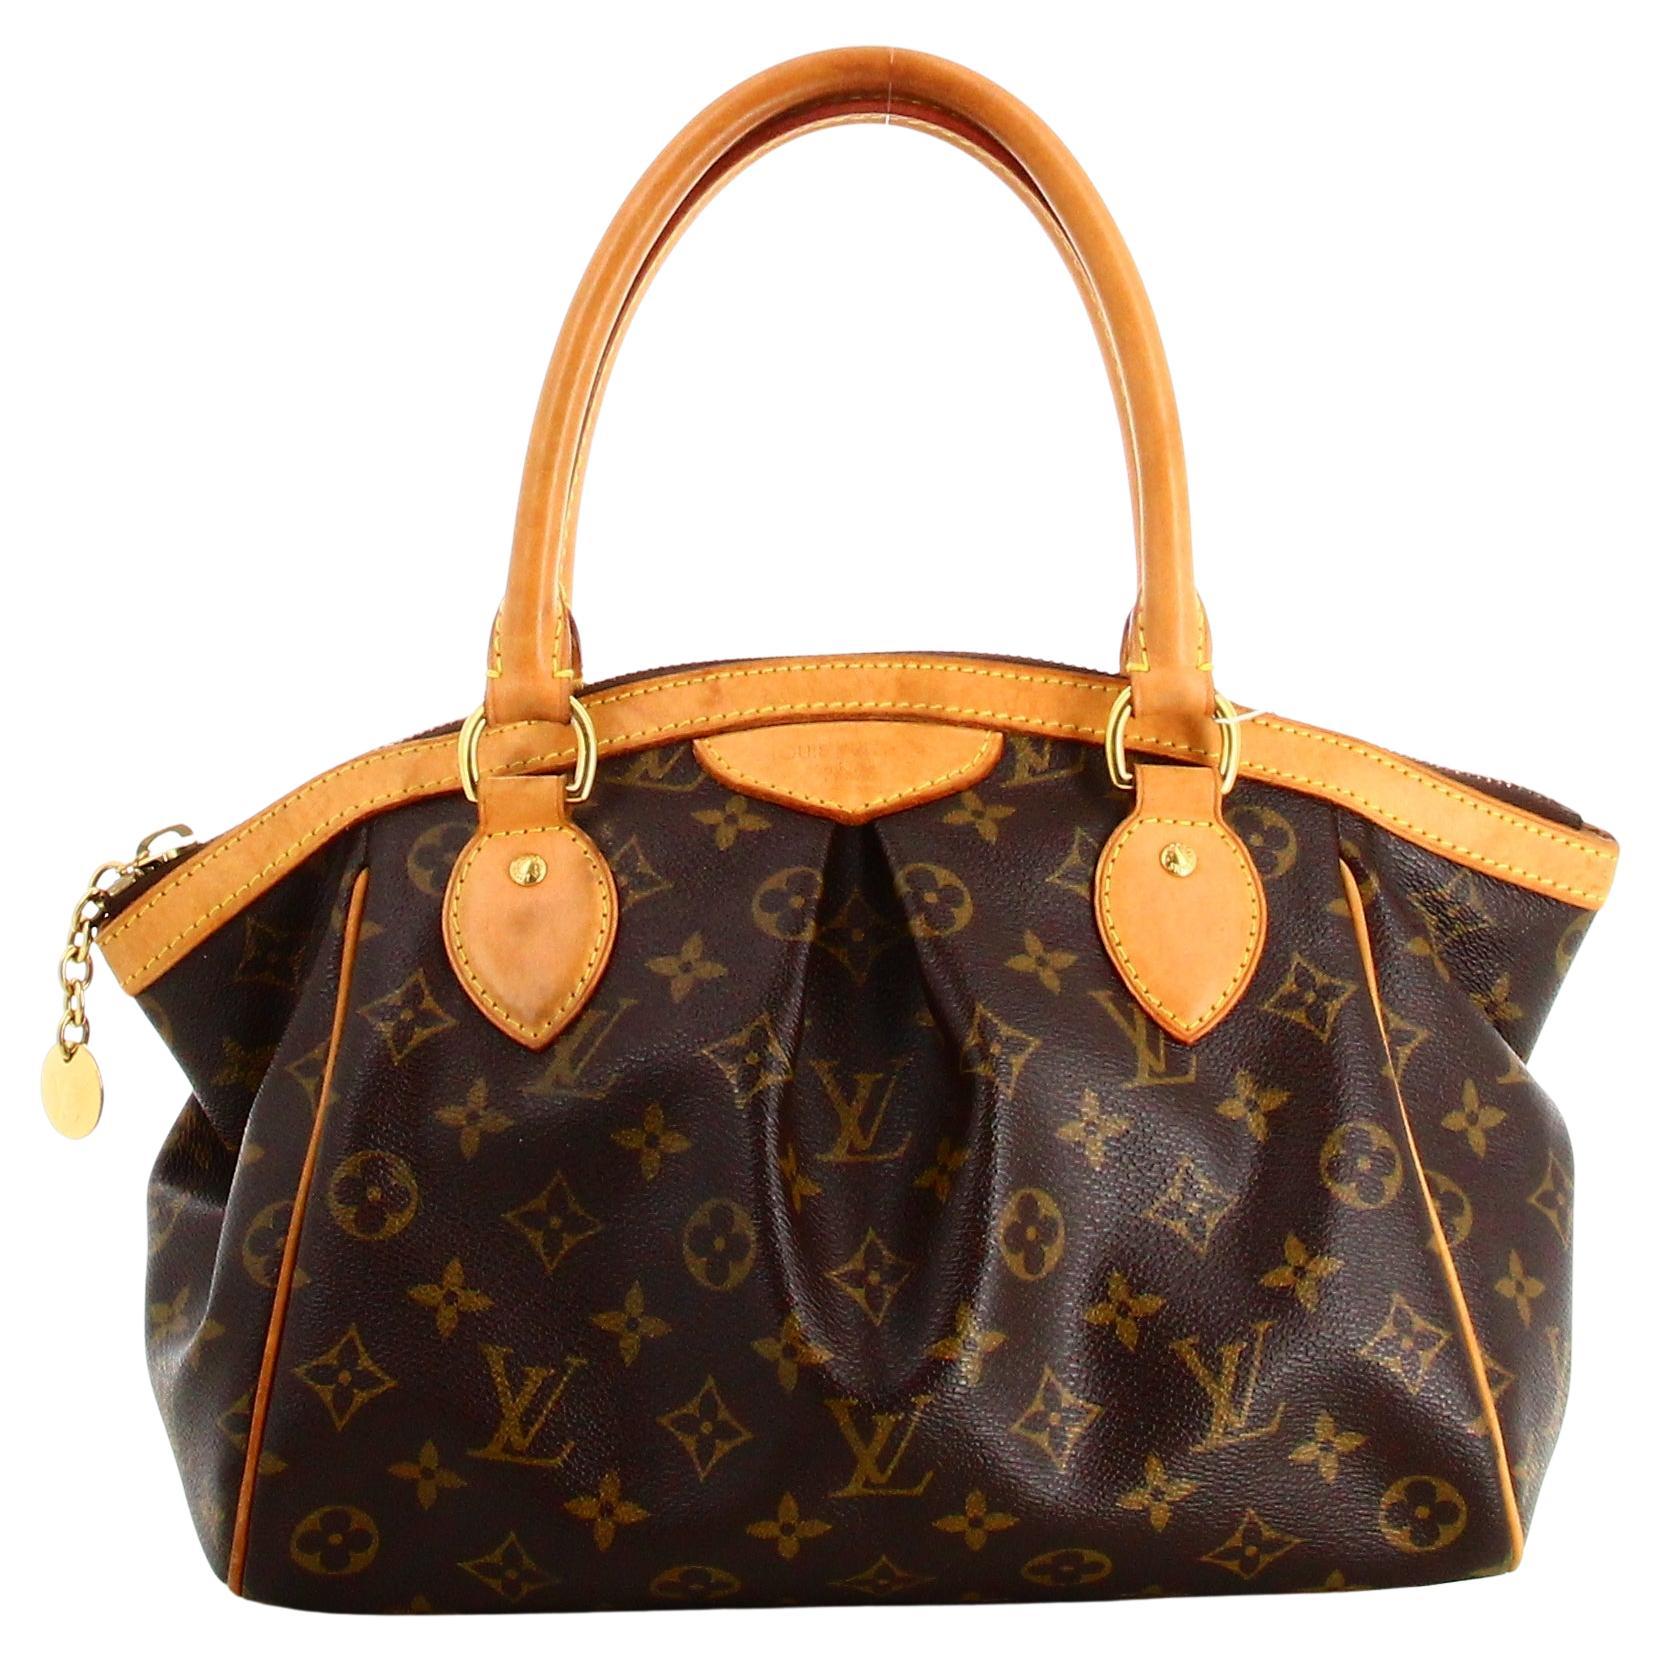 What is the original Louis Vuitton pattern?